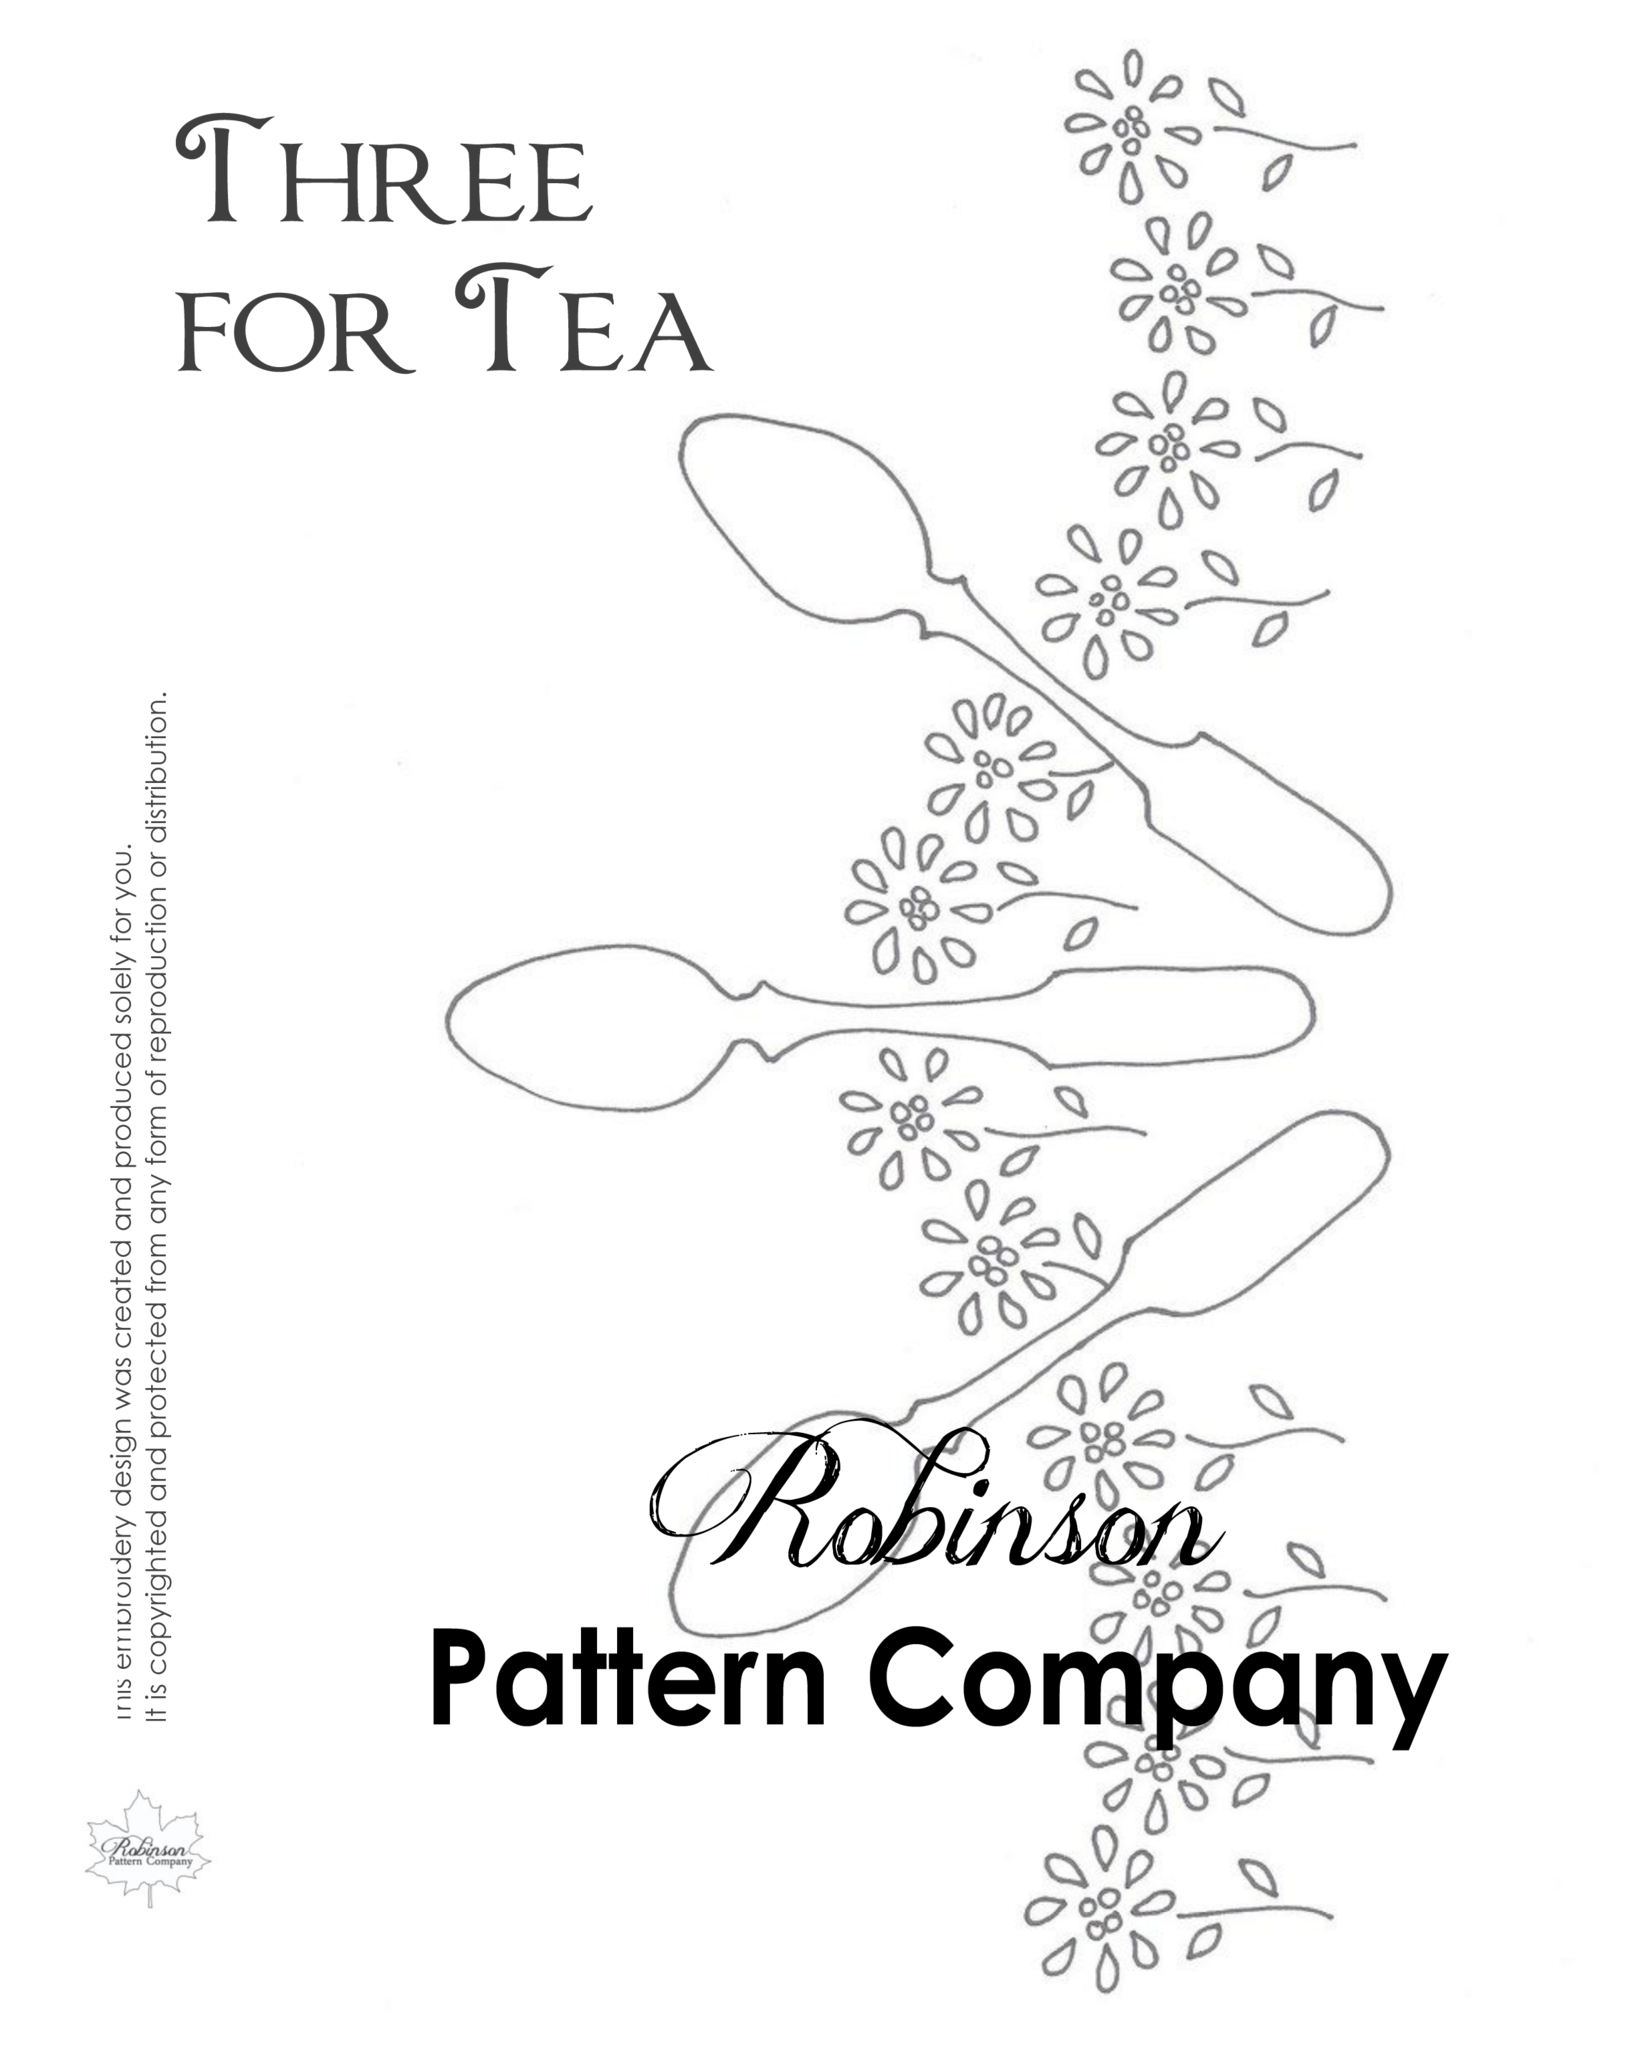 Three for Tea Hand Embroidery pattern